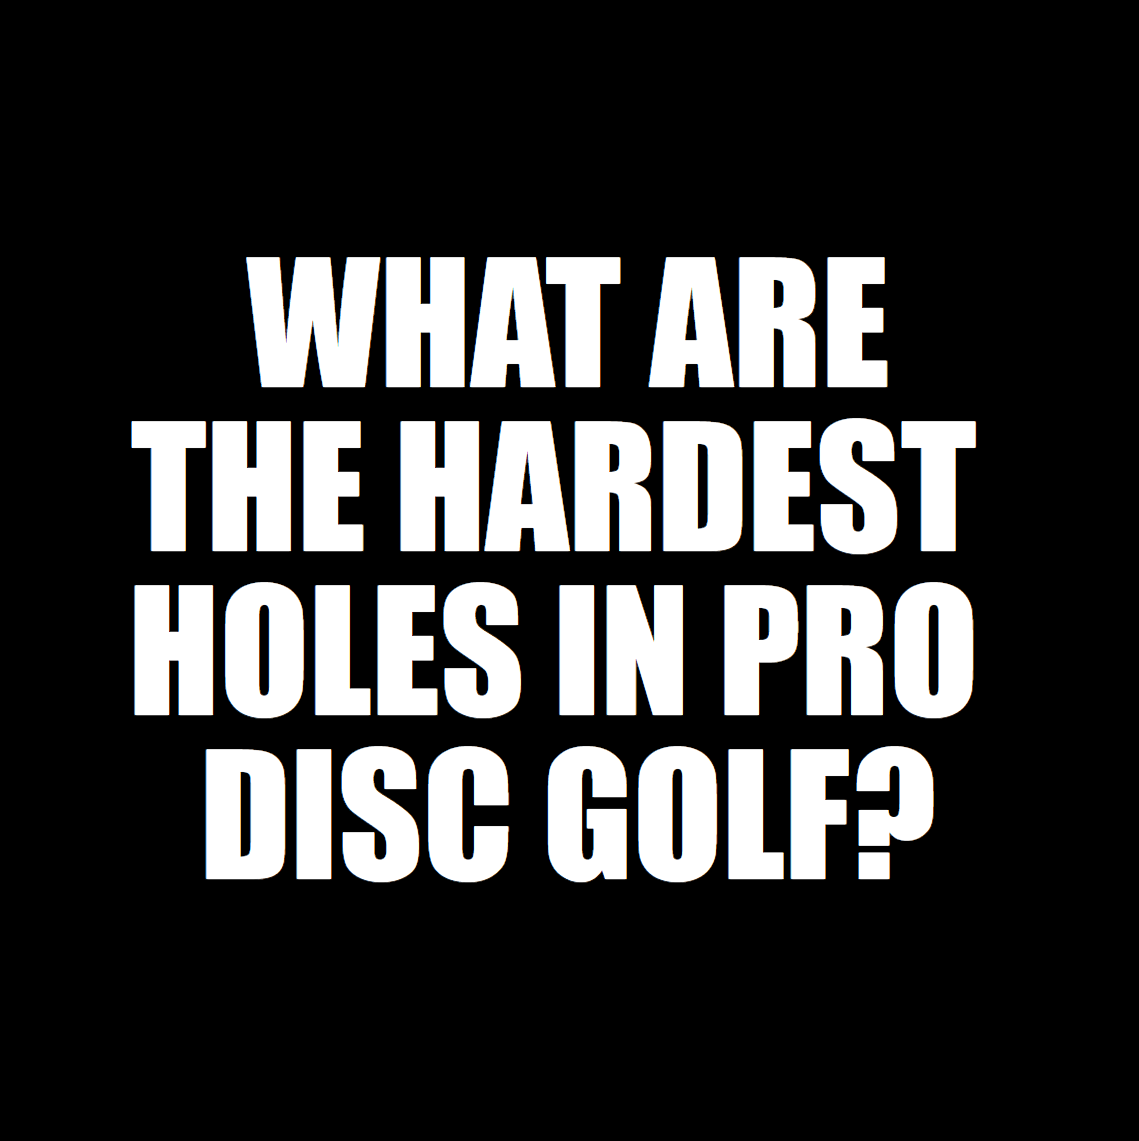 What are the hardest holes in professional disc golf, from 2016 til 2022 Helsinki event